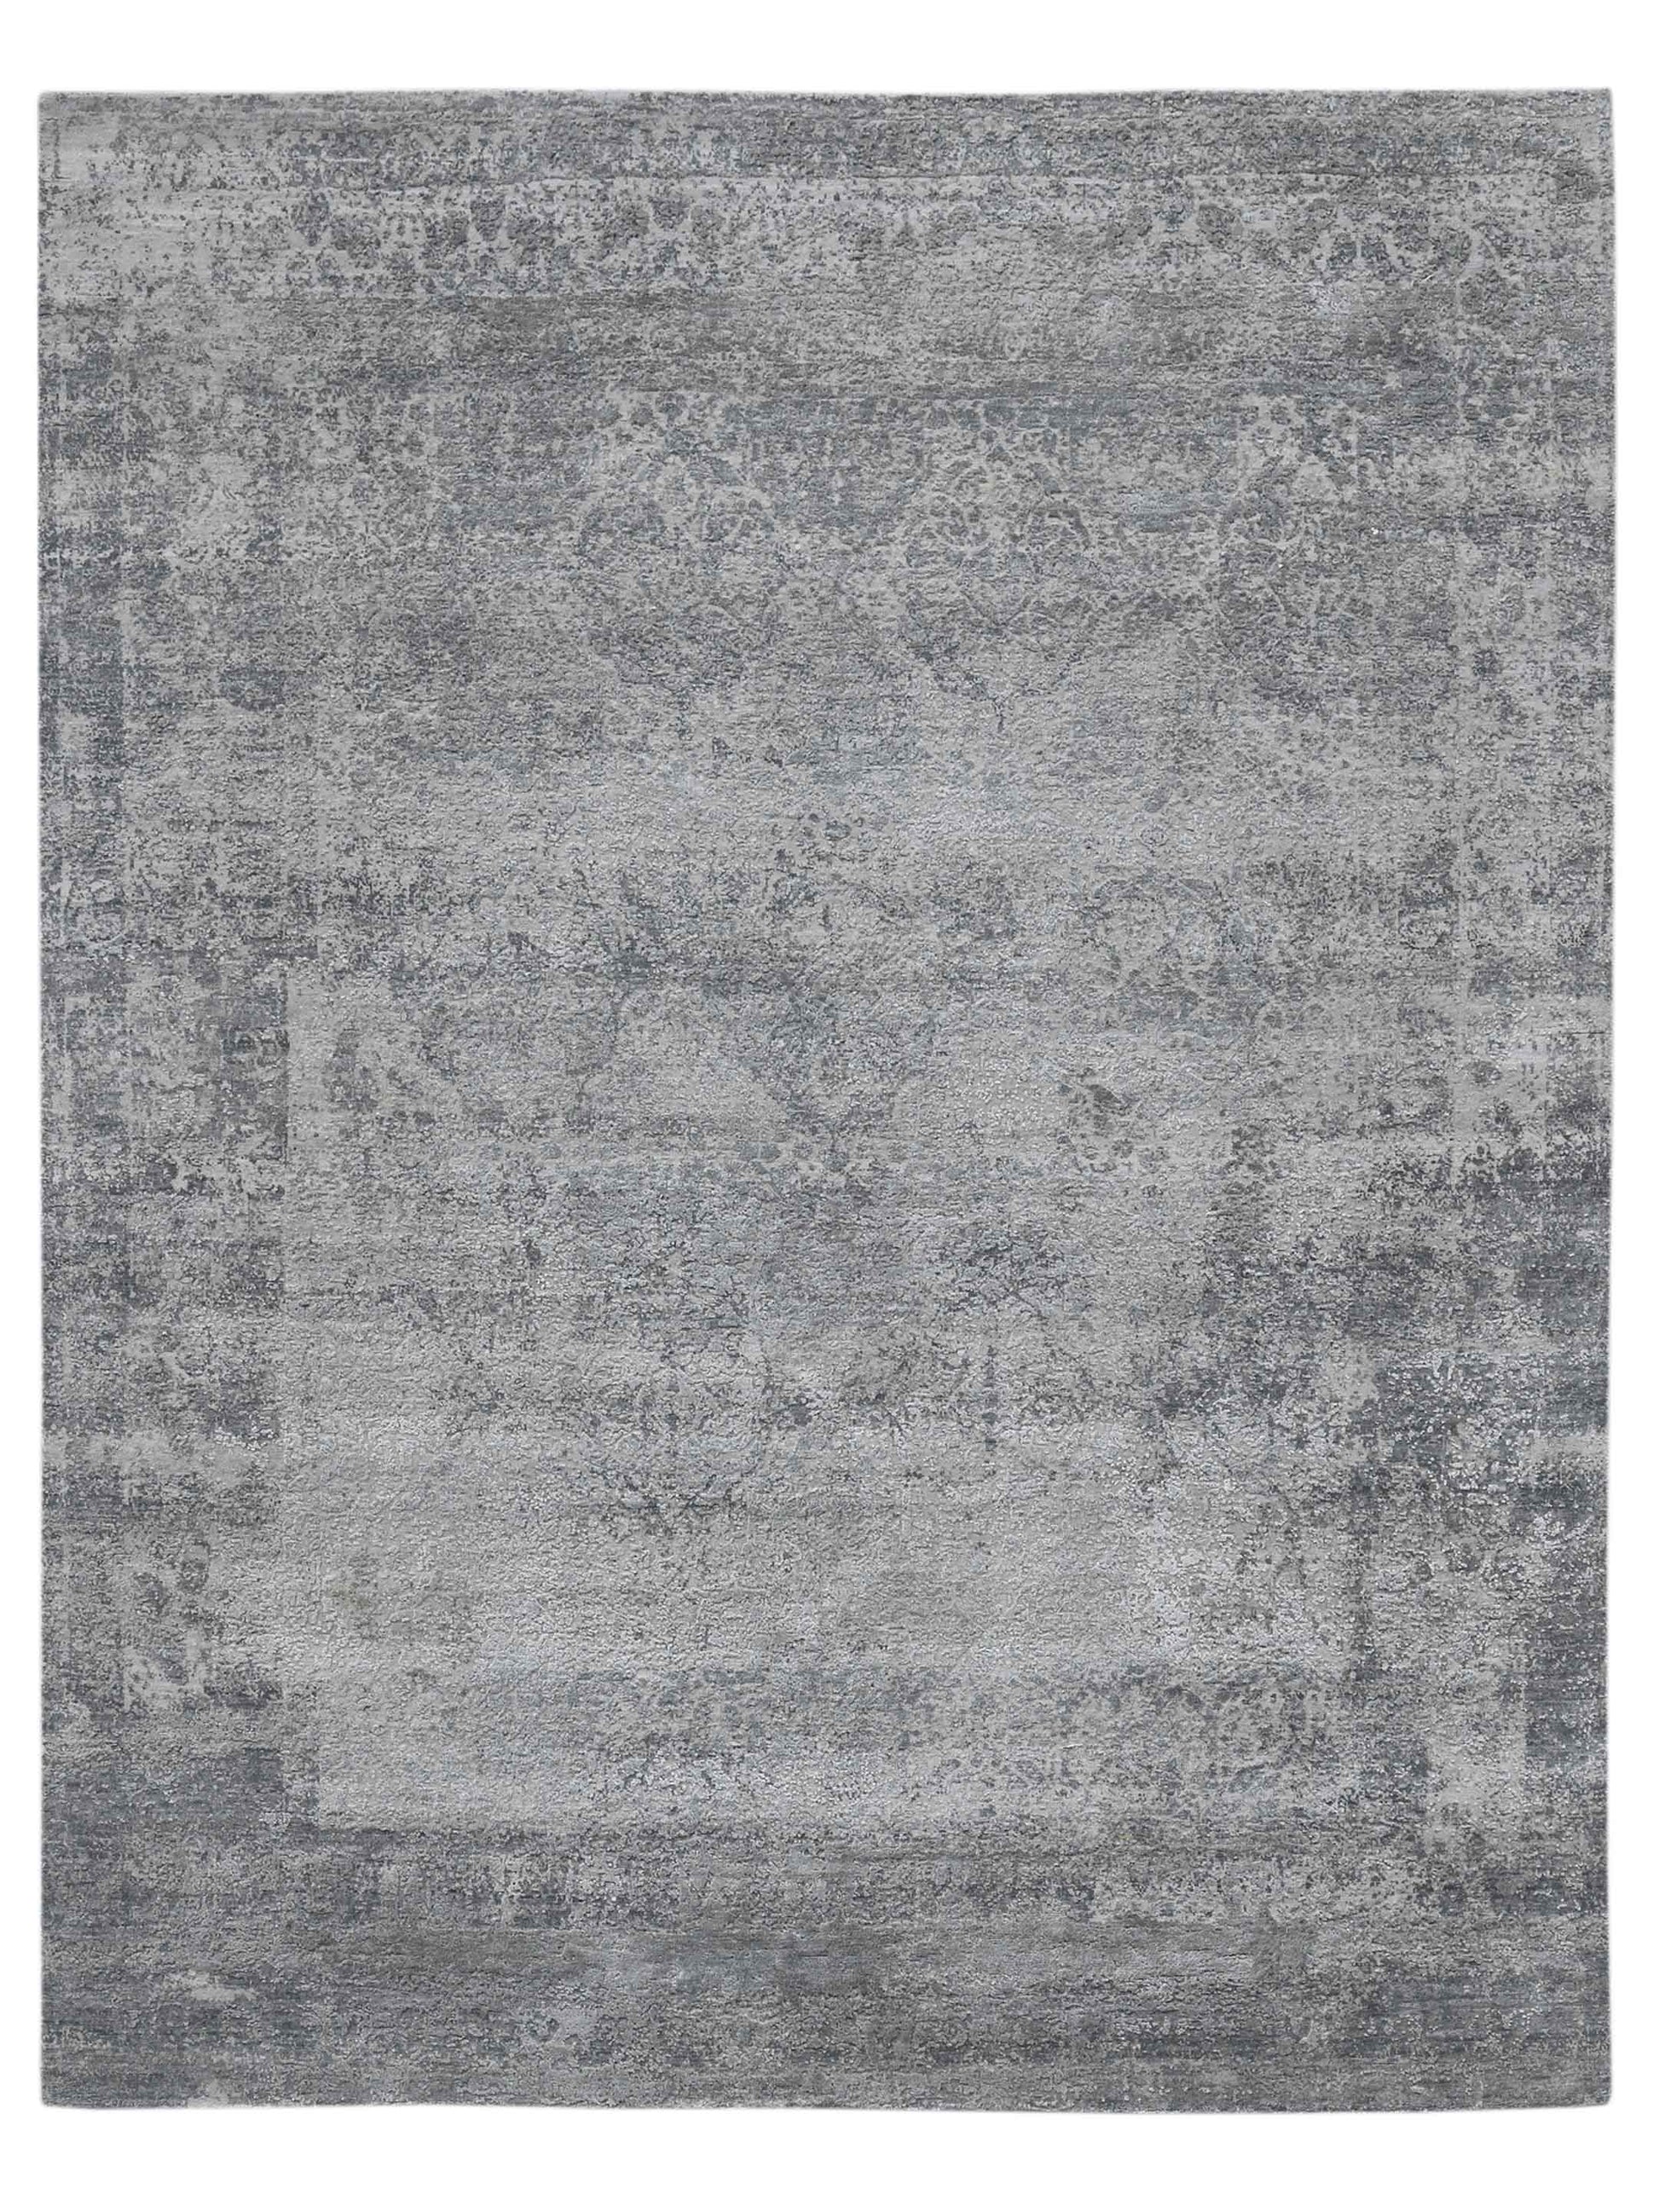 Limited Zelma WI-486 GRAY Transitional Knotted Rug